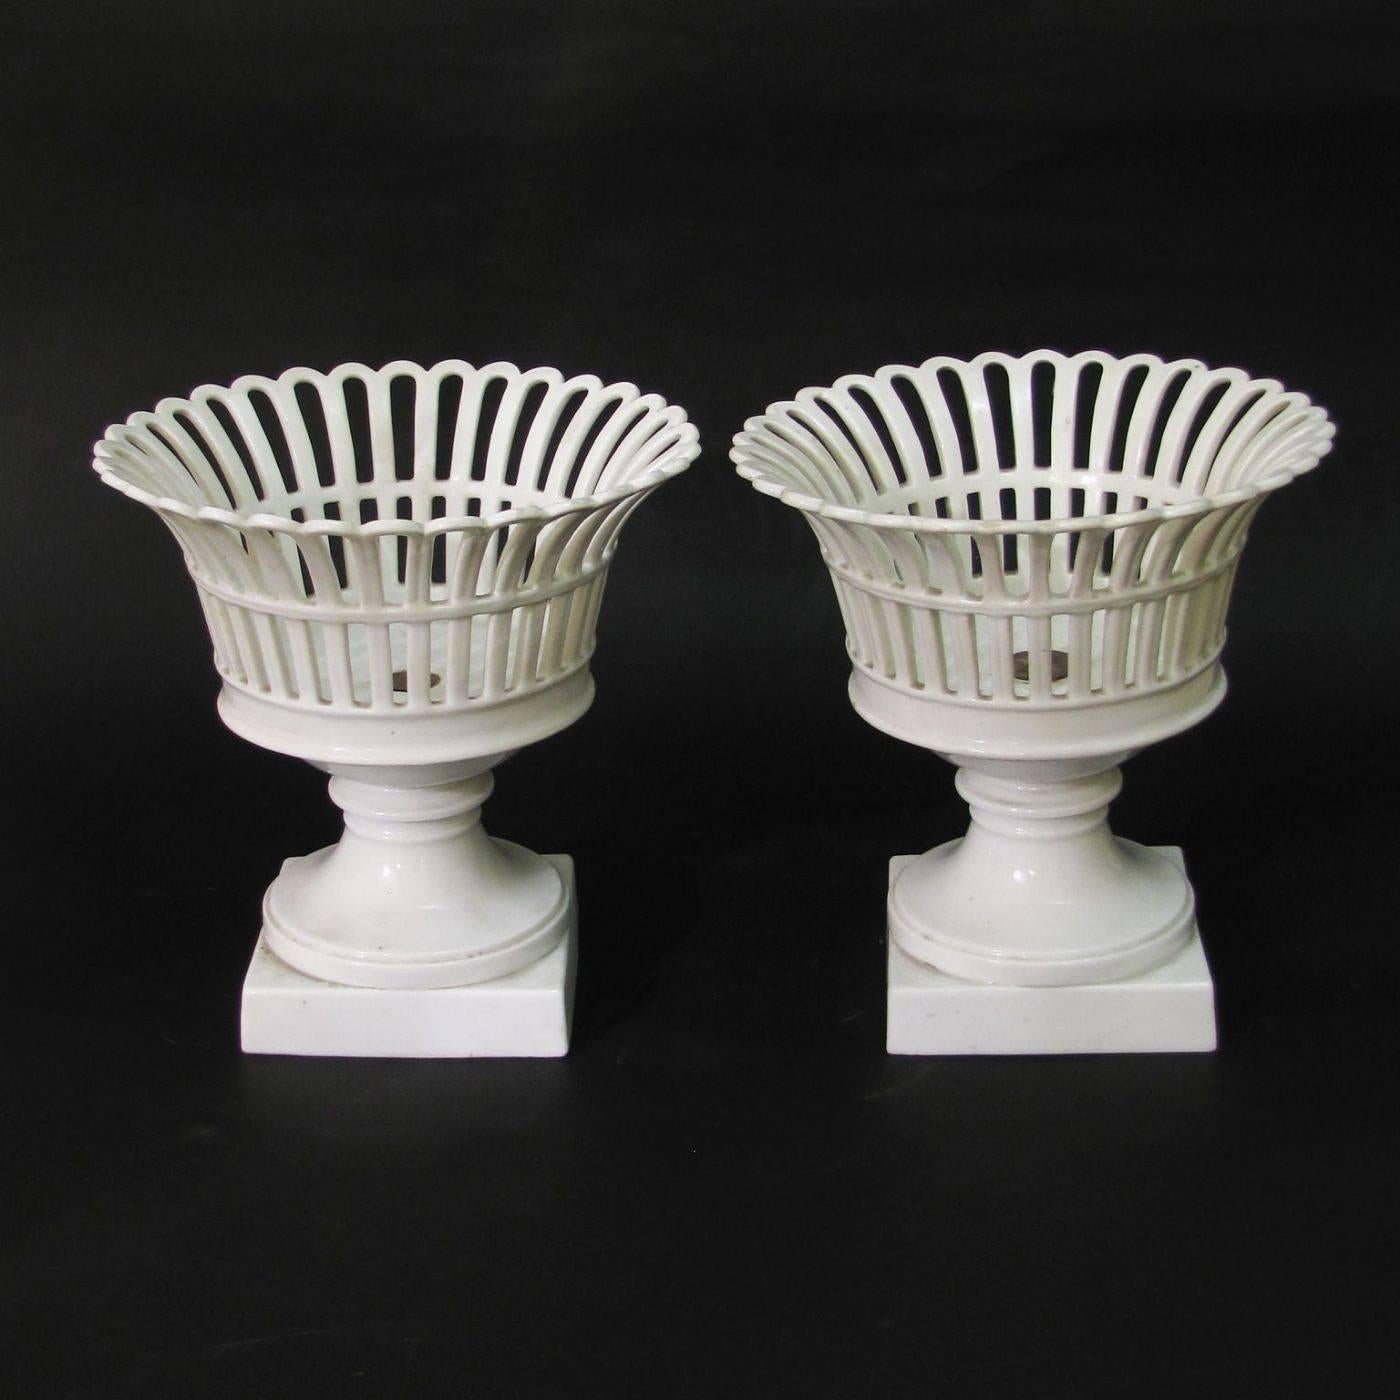 Pair of 19th Century Italian White Porcelain Fruit Baskets or Bowls In Good Condition For Sale In Firenze, IT